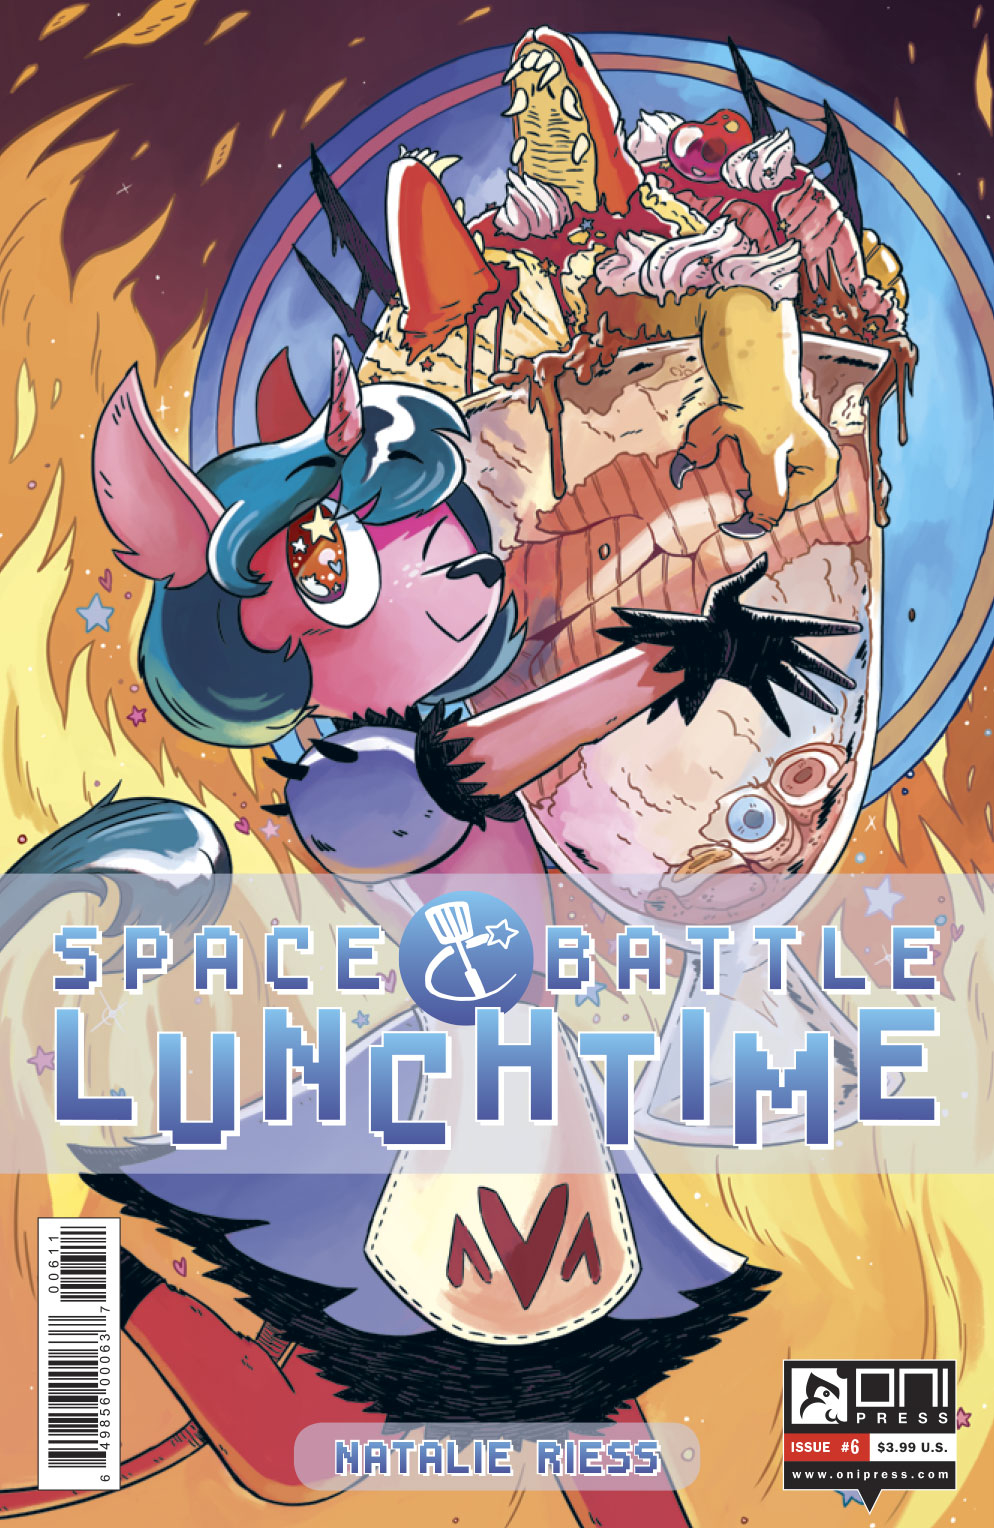 SPACE BATTLE LUNCHTIME #6 (OF 8)